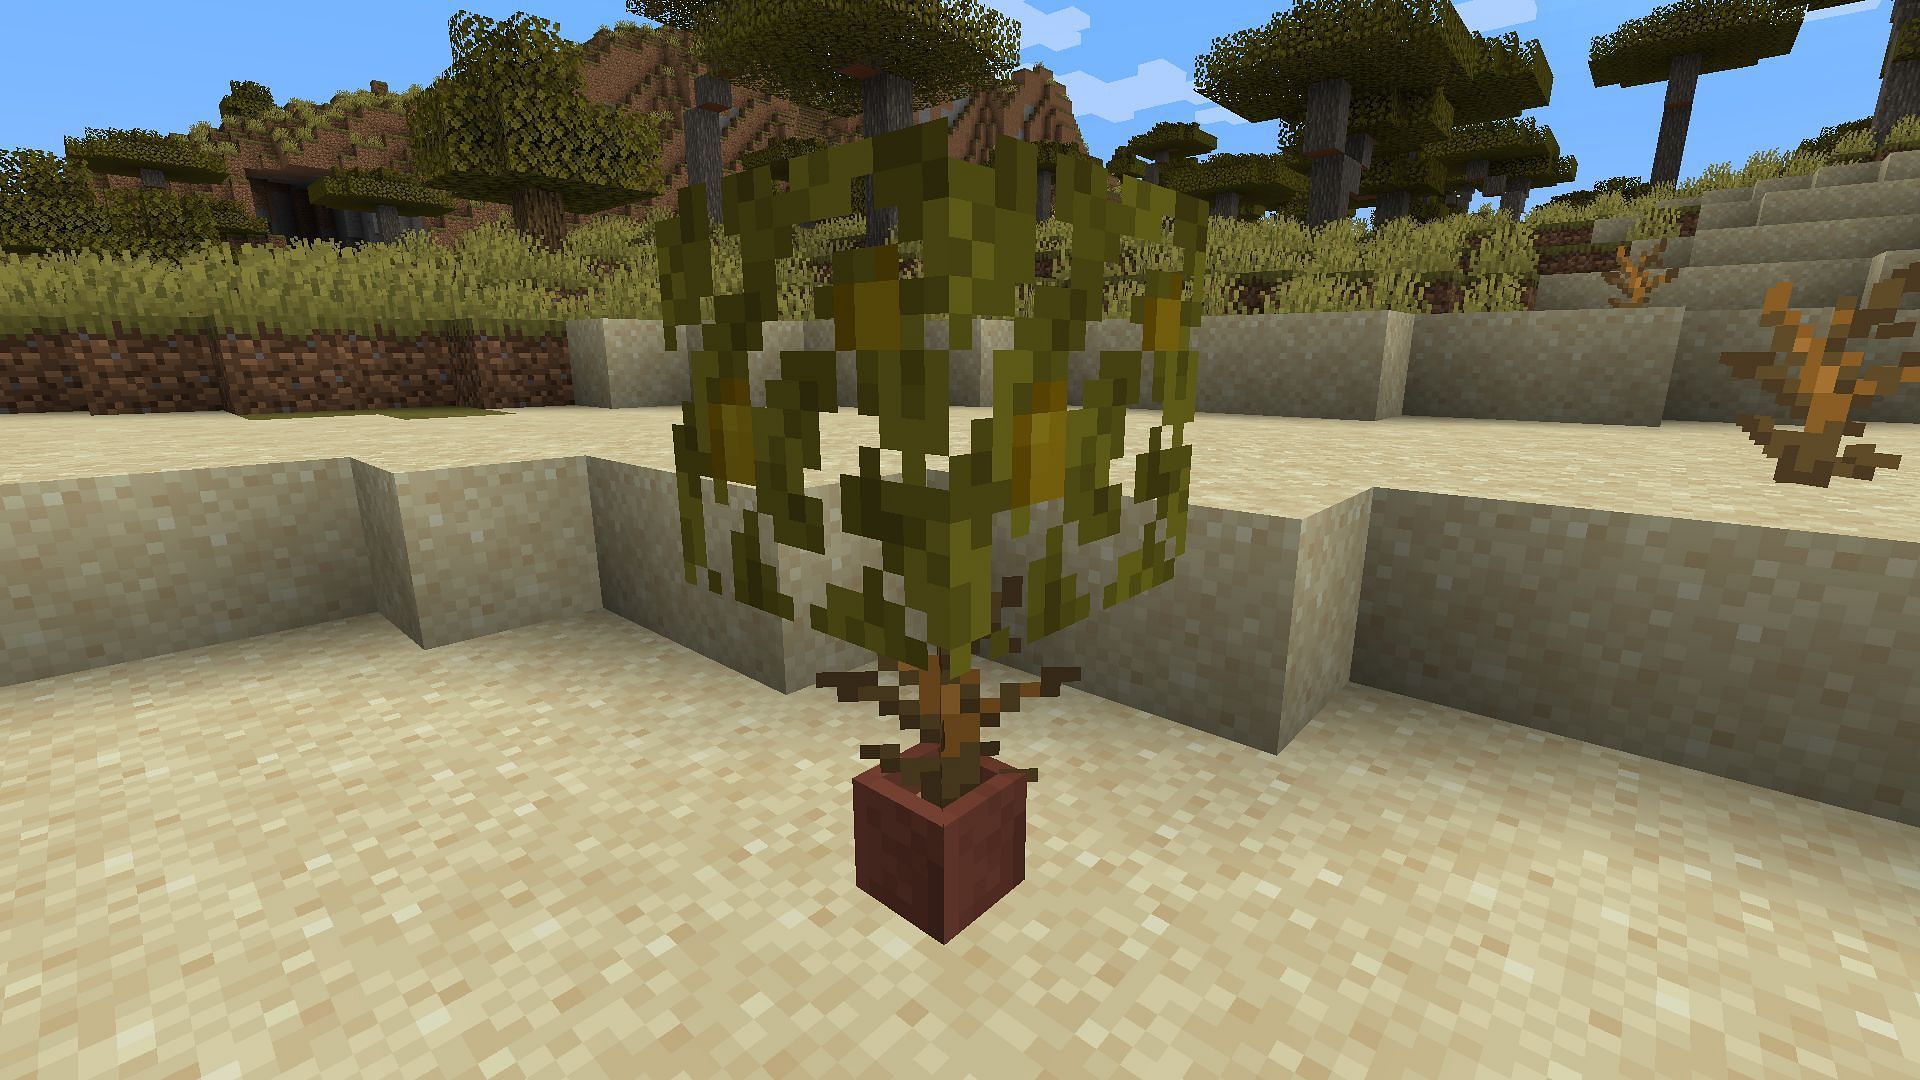 Dead bushes can be useful for creating custom plants in Minecraft (Image via Mojang)